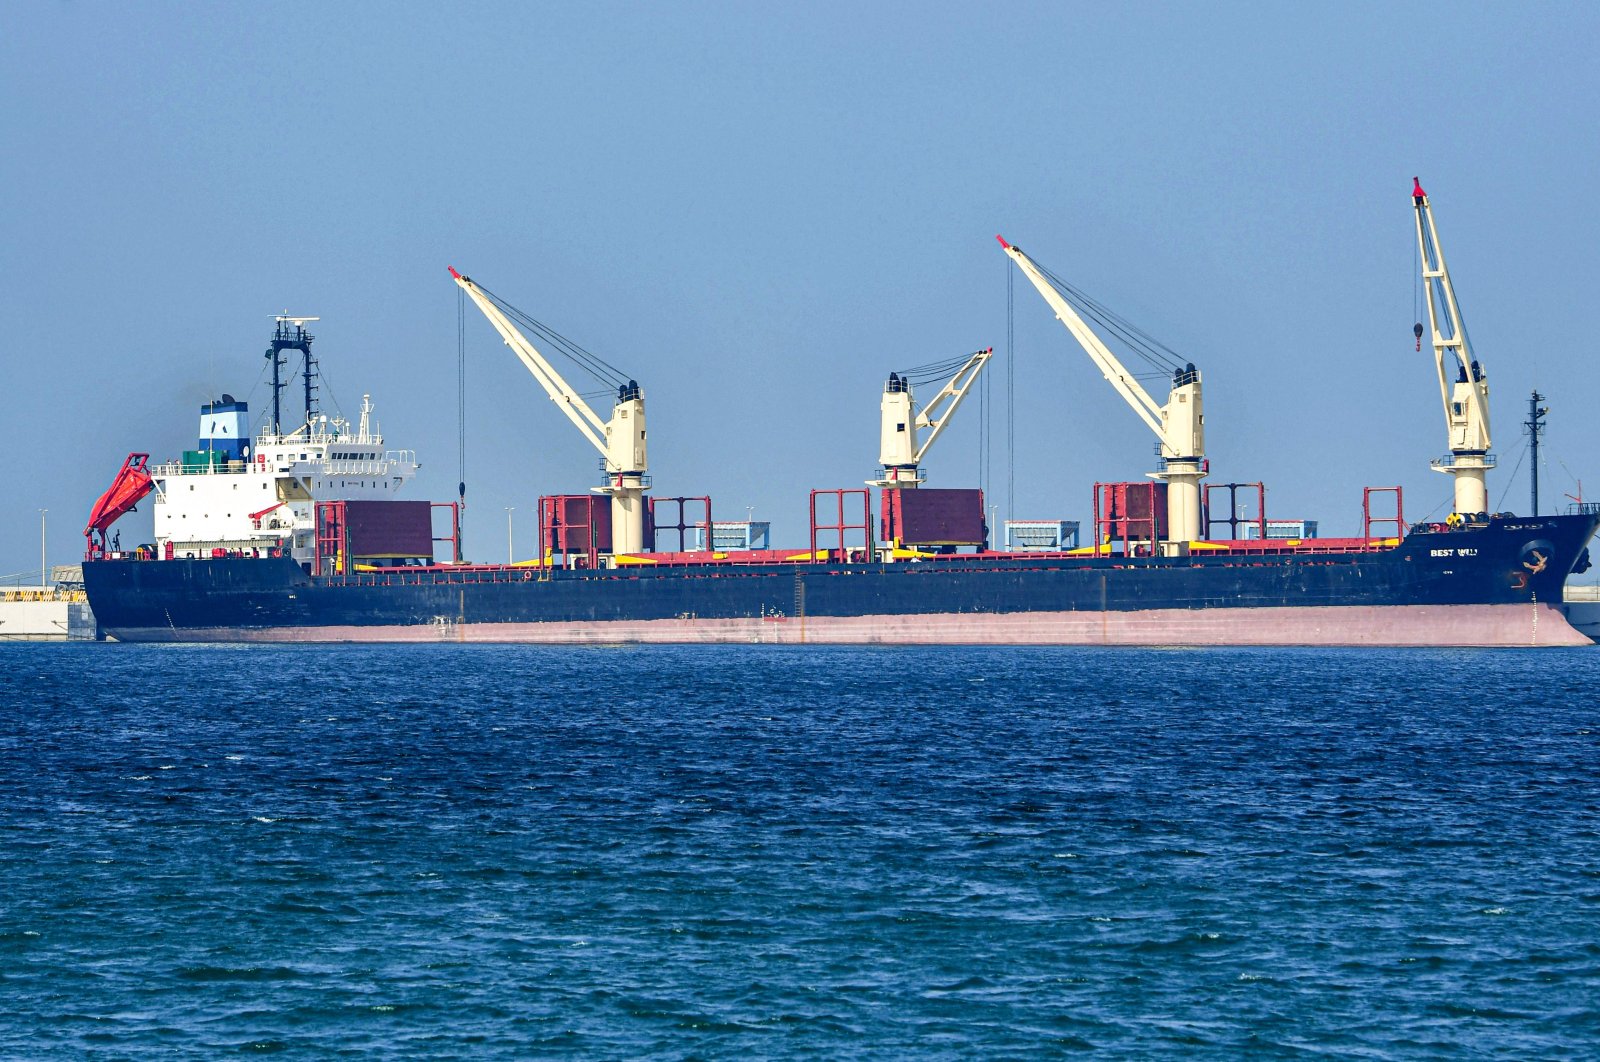 In this file photo taken on December 11, 2019, shows an oil tanker at the port of Ras al-Khair, about 185 kilometres north of Dammam in Saudi Arabia's eastern province overlooking the Gulf. (AFP Photo)